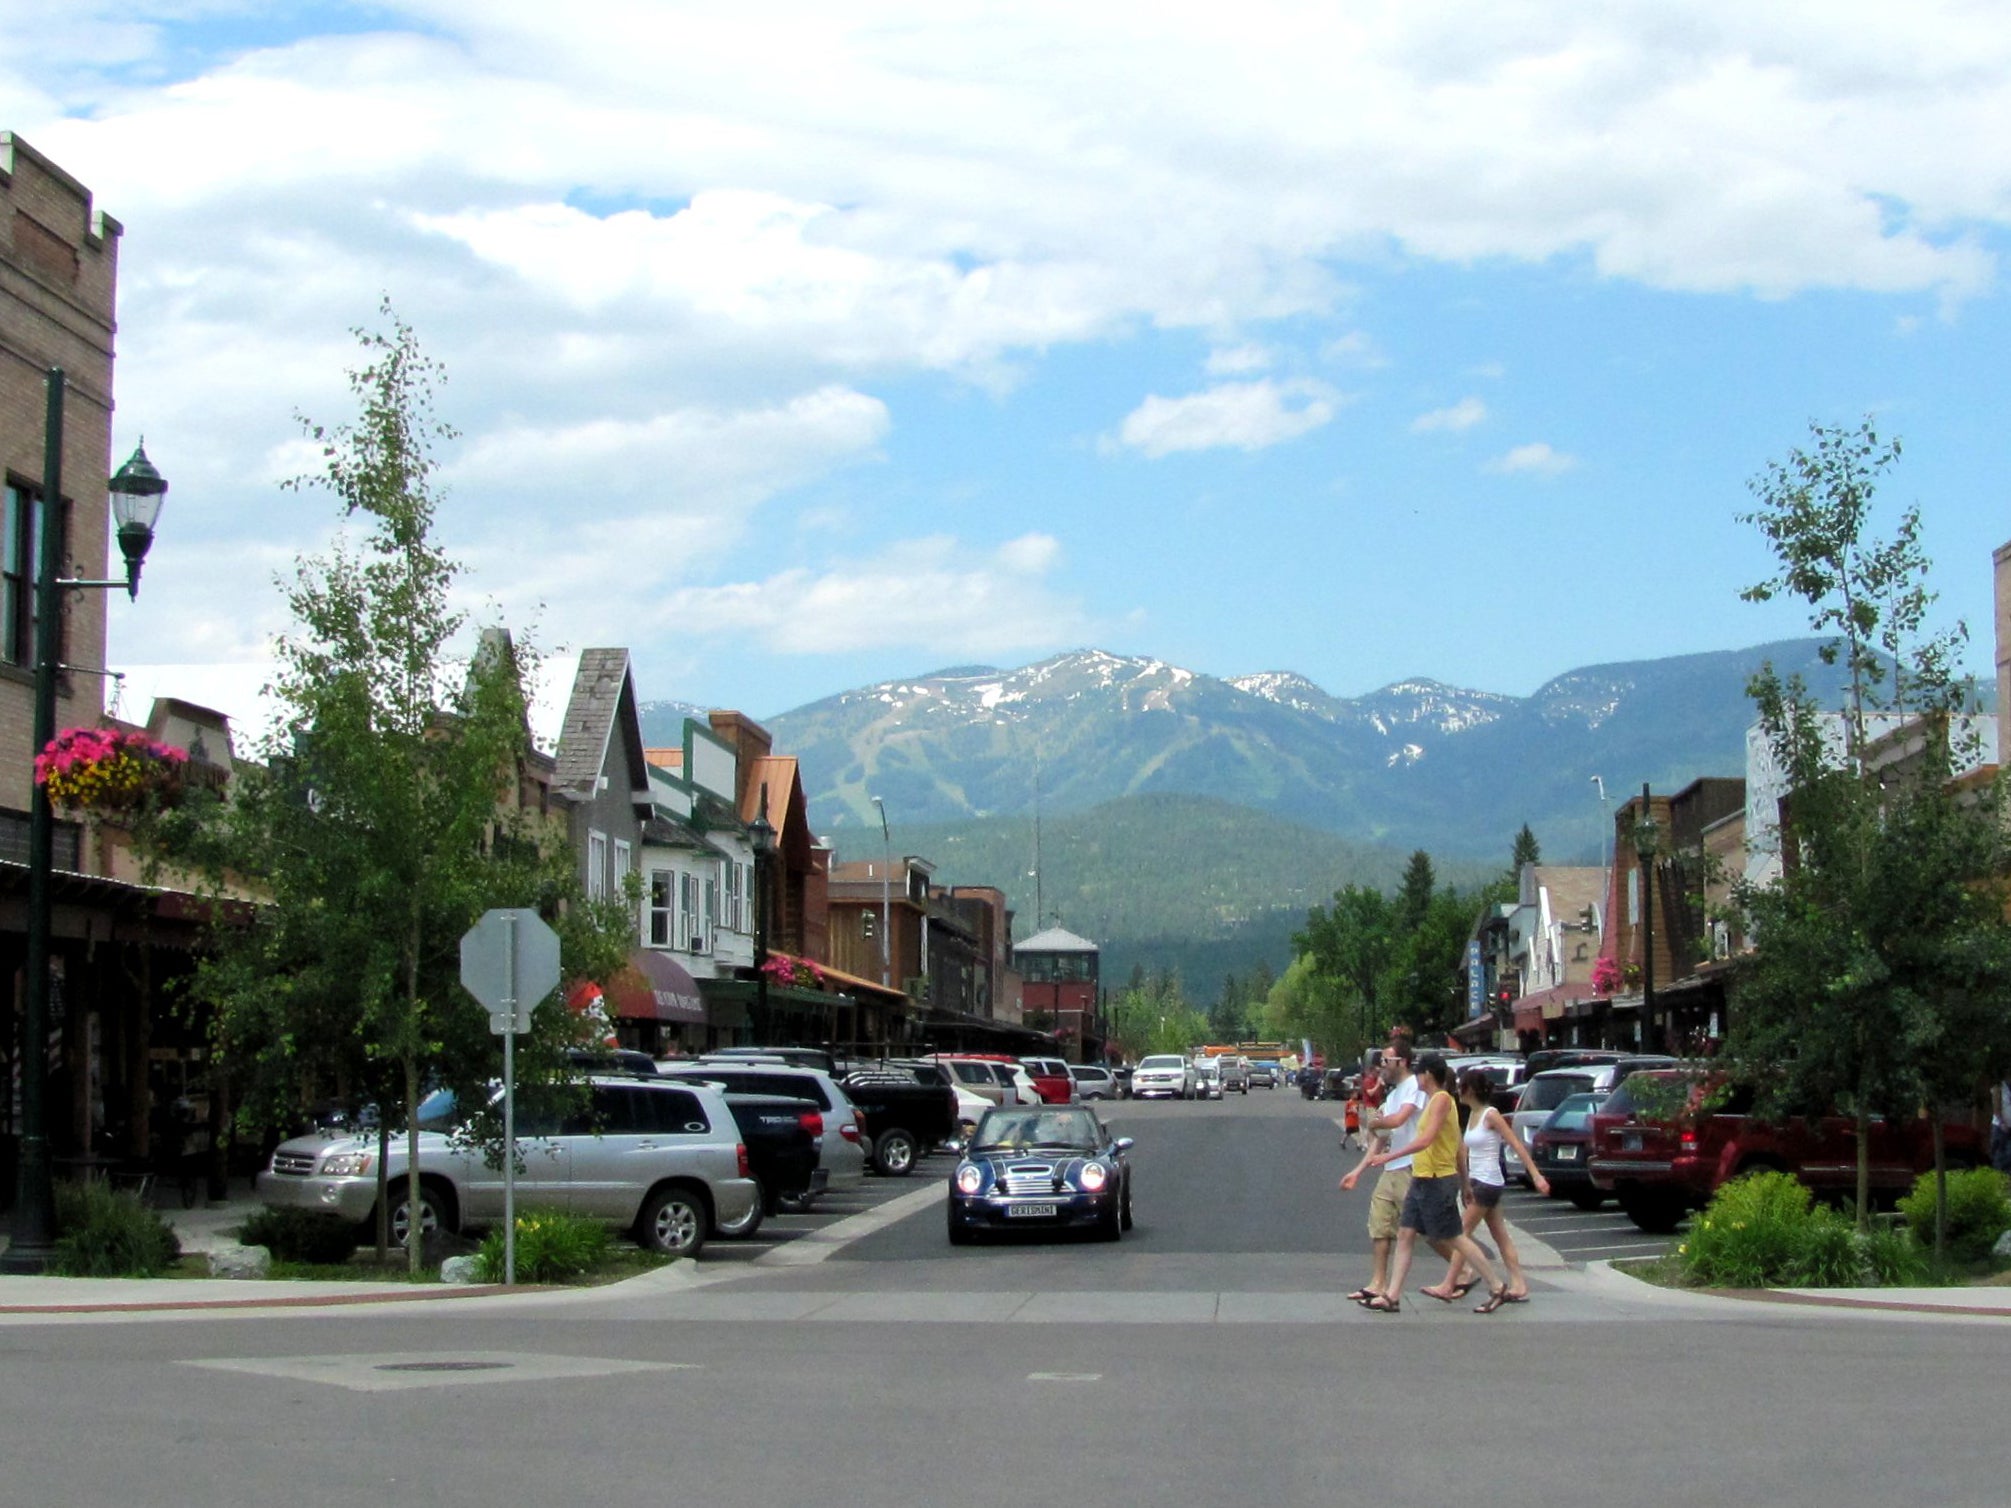 Whitefish, Montana, is a small town in the Rocky Mountains